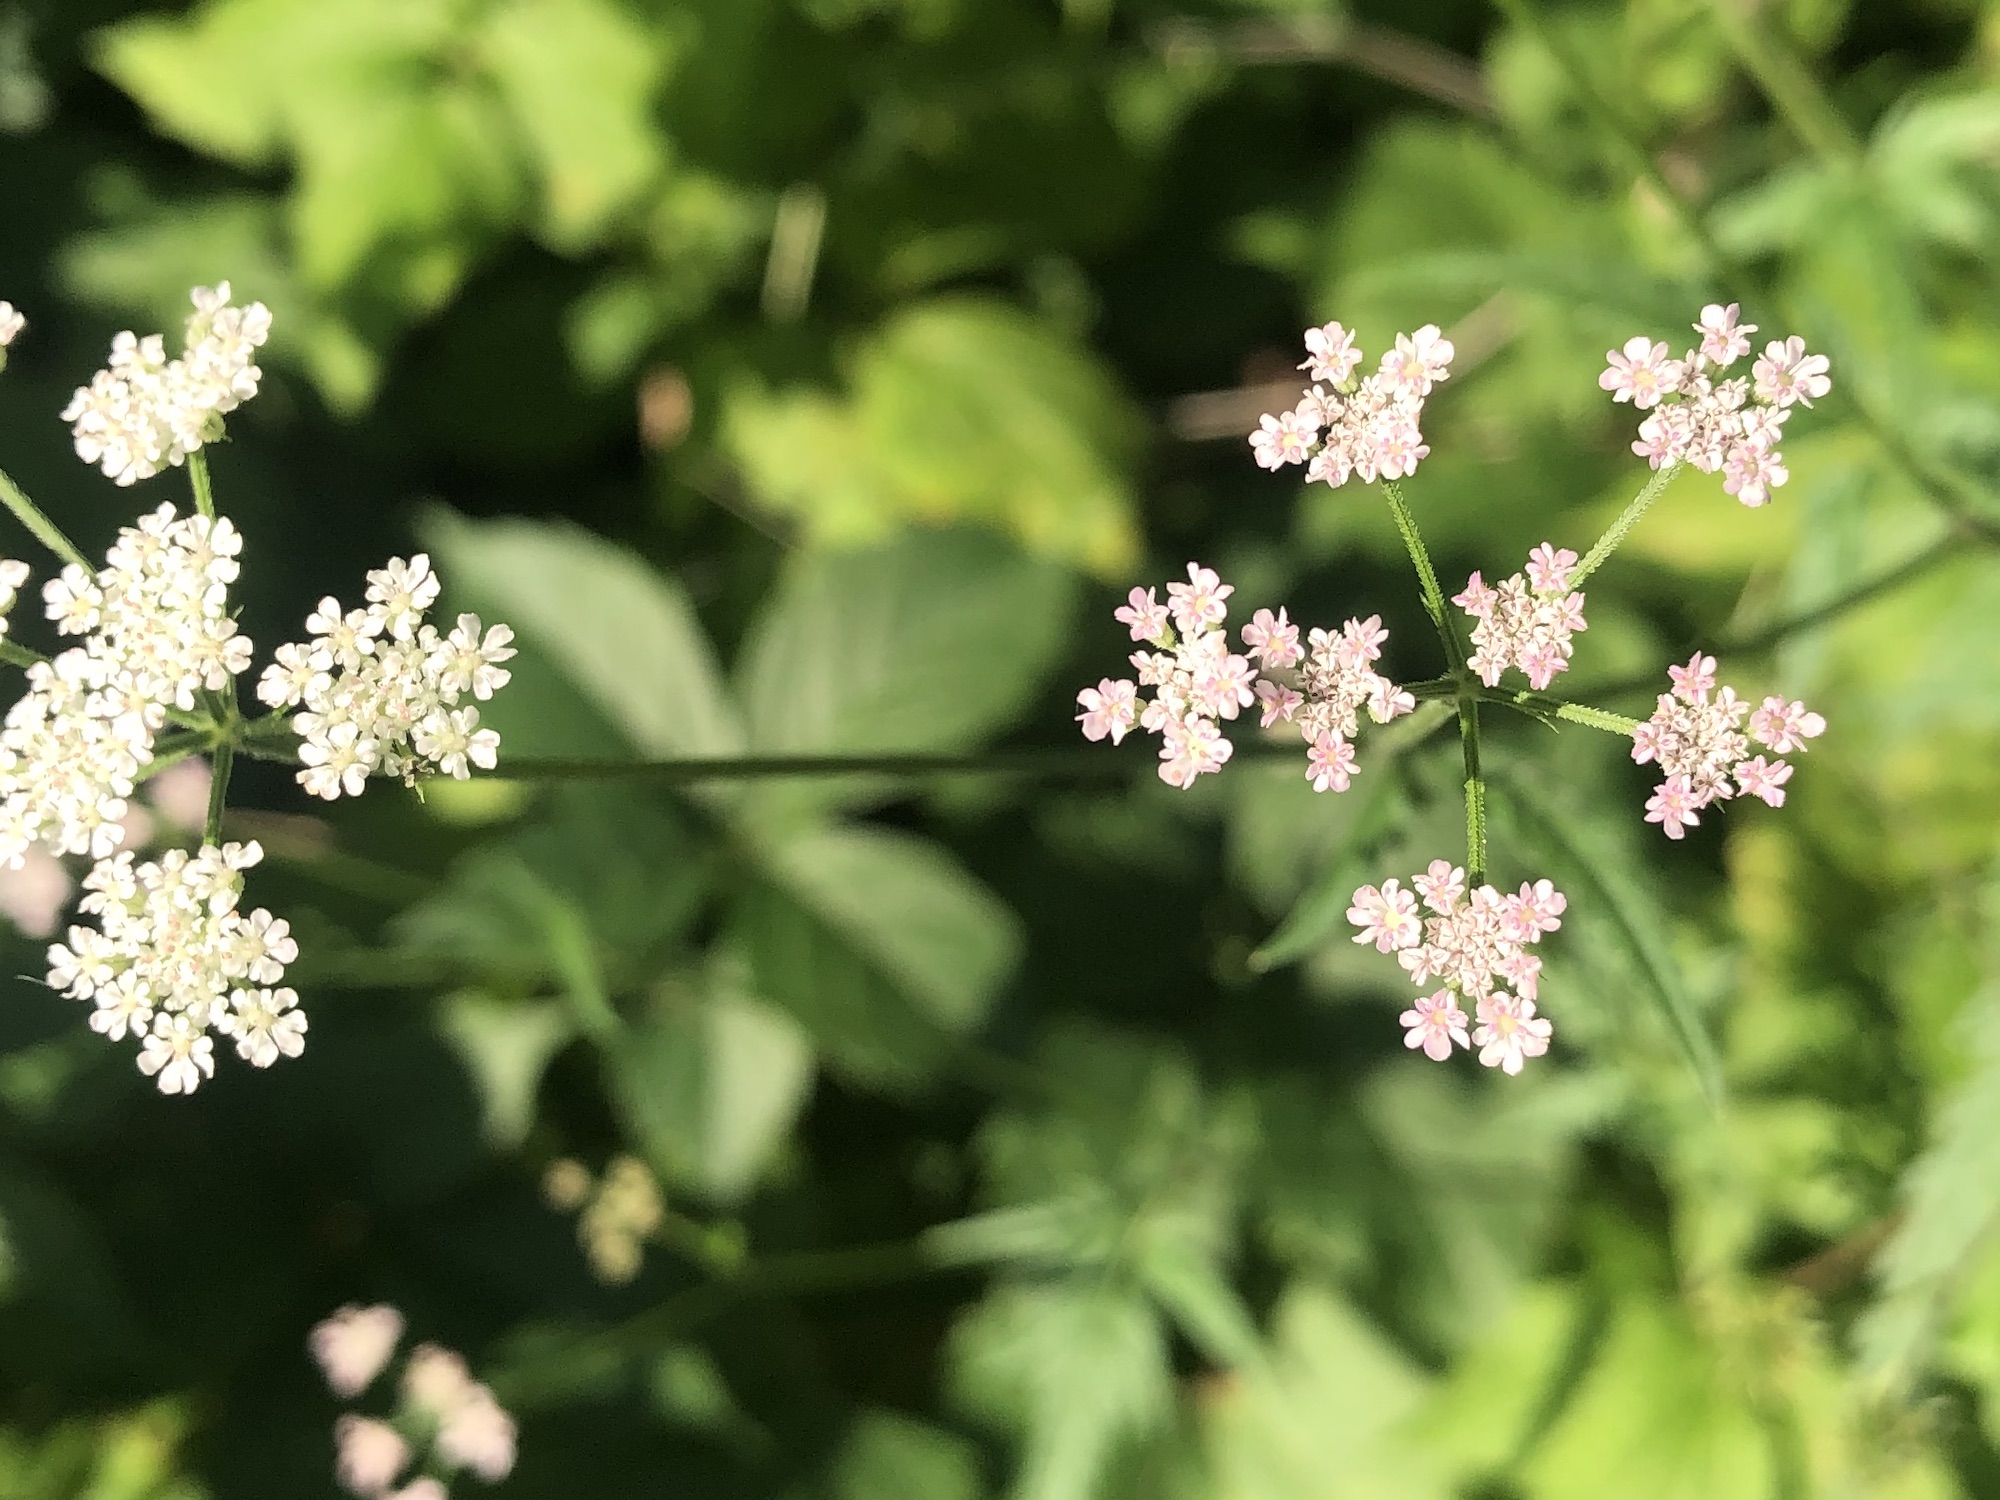 Hedge Parsley in Madison, Wisconsin on July 19, 2022